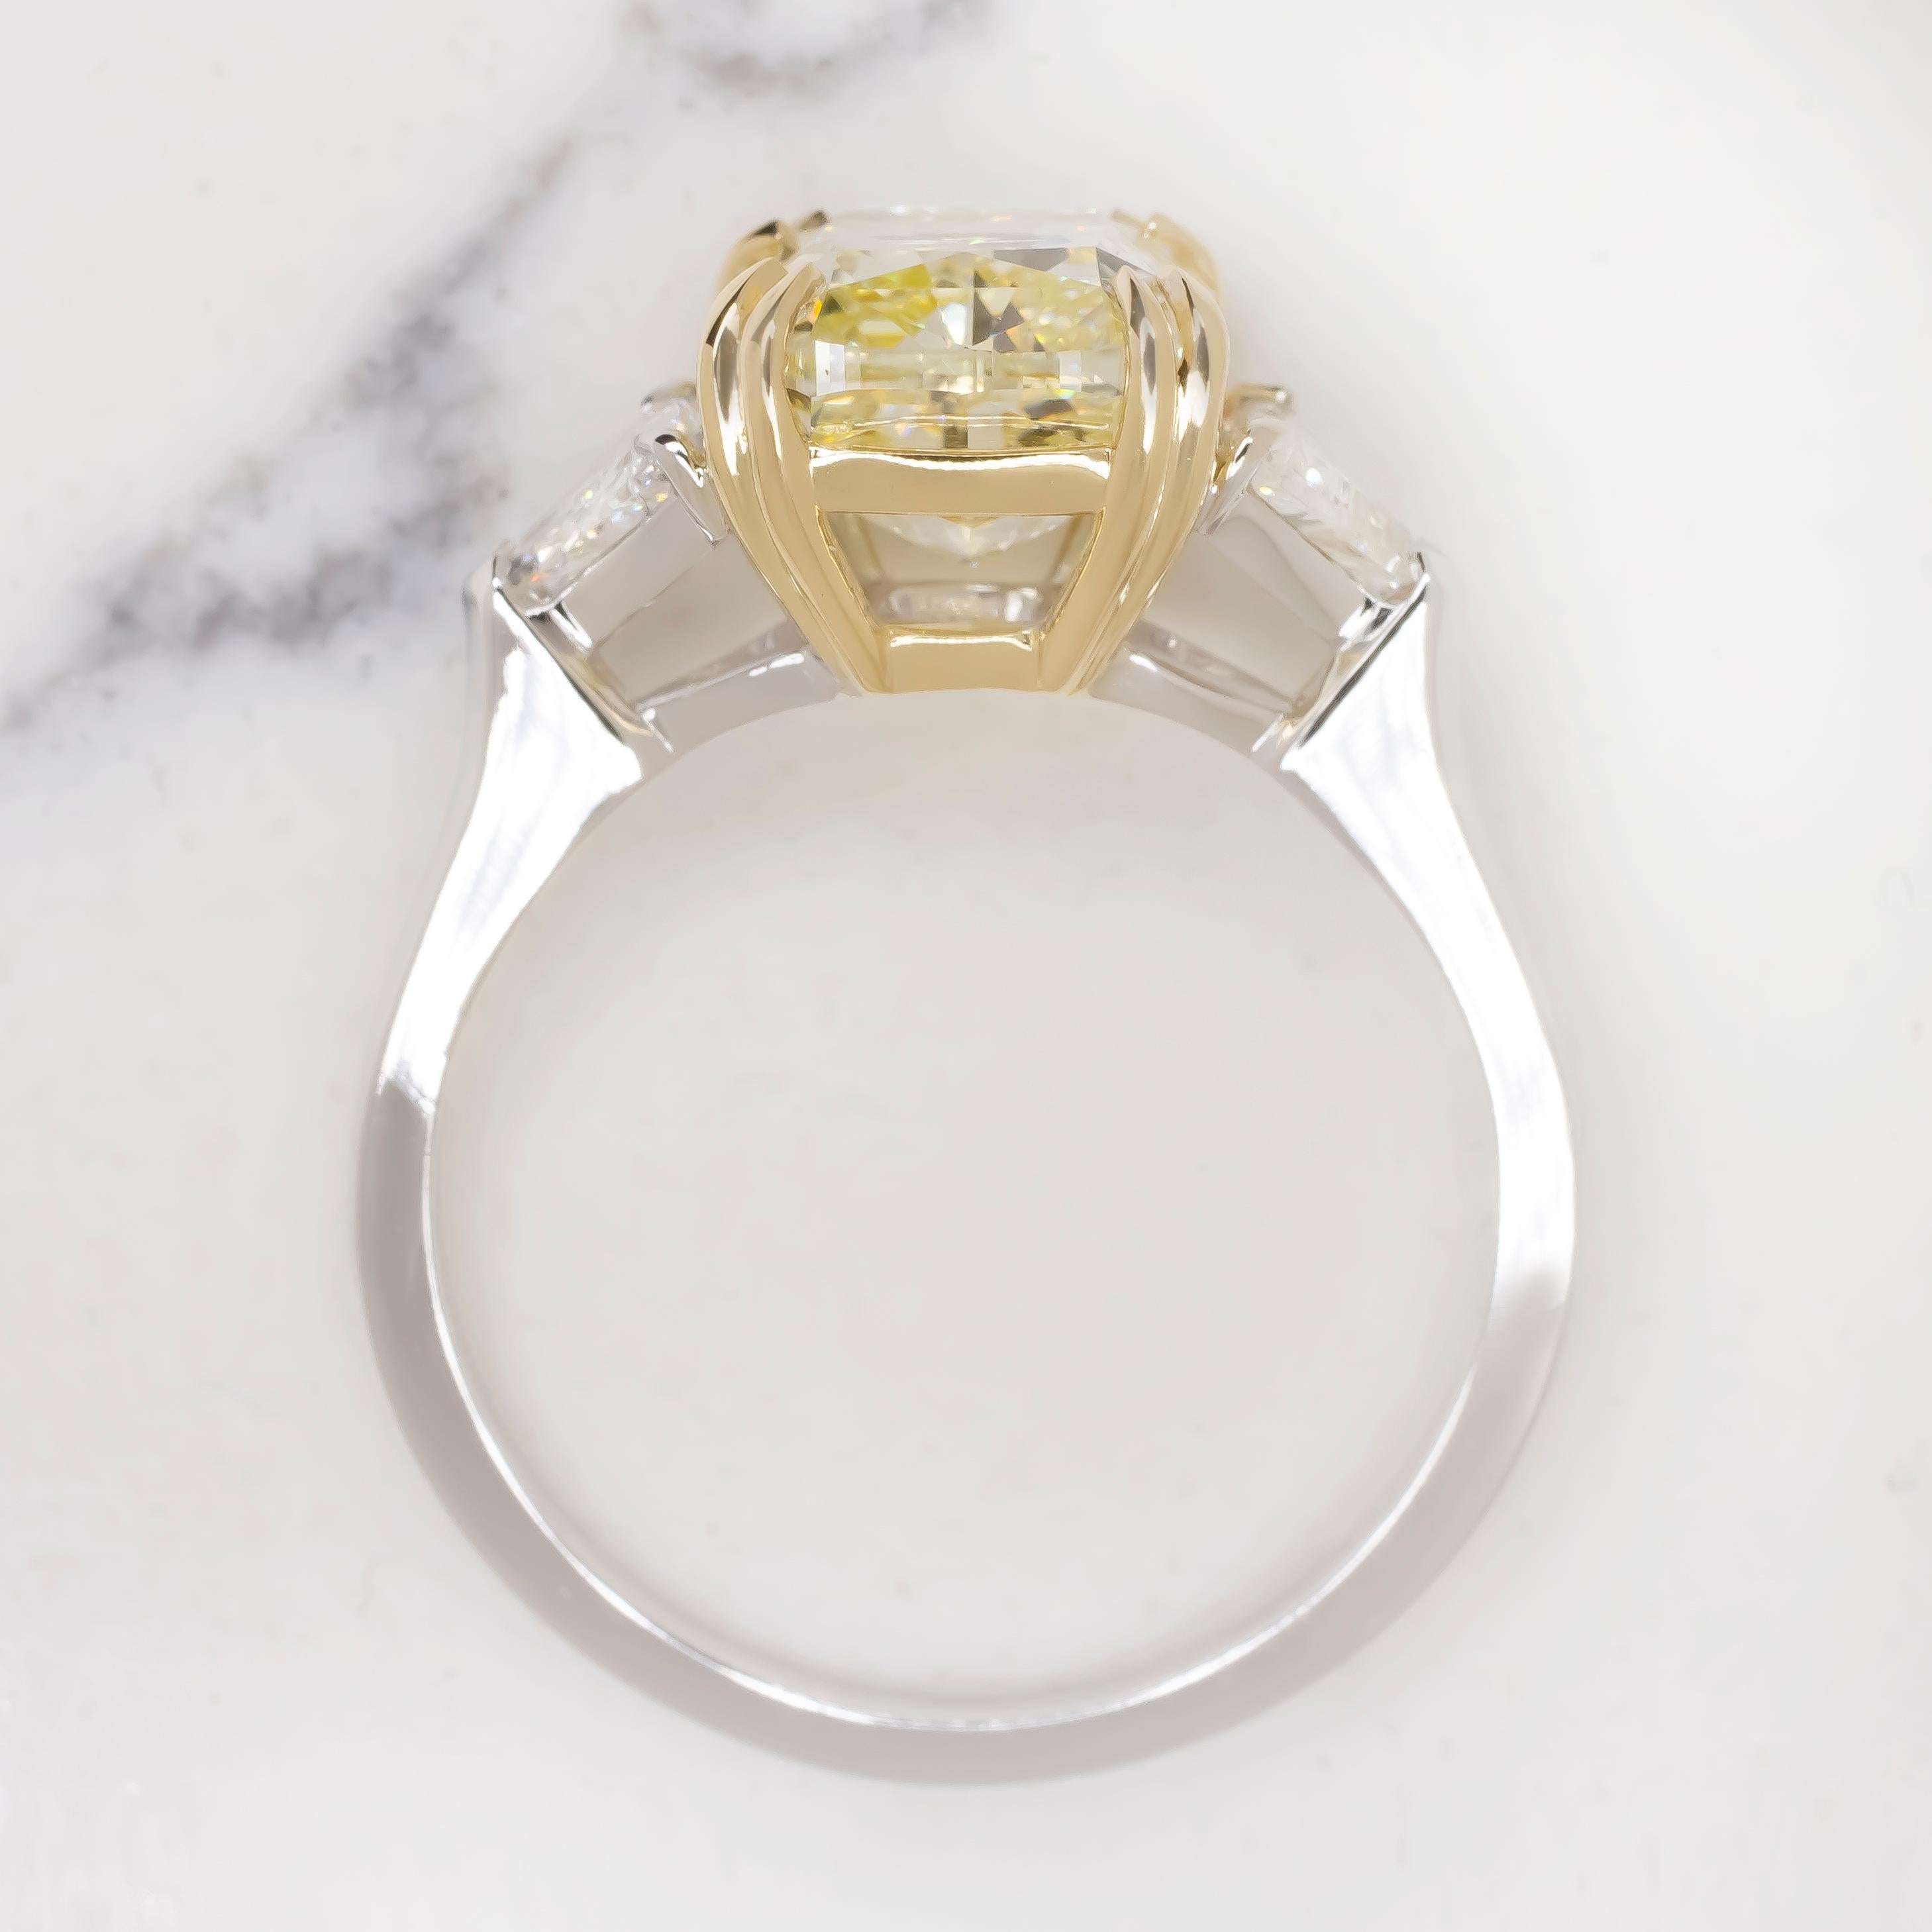 Contemporary Flawless GIA Certified 4 Carat Fancy Light Yellow Cushion Diamond 18k Gold Ring For Sale